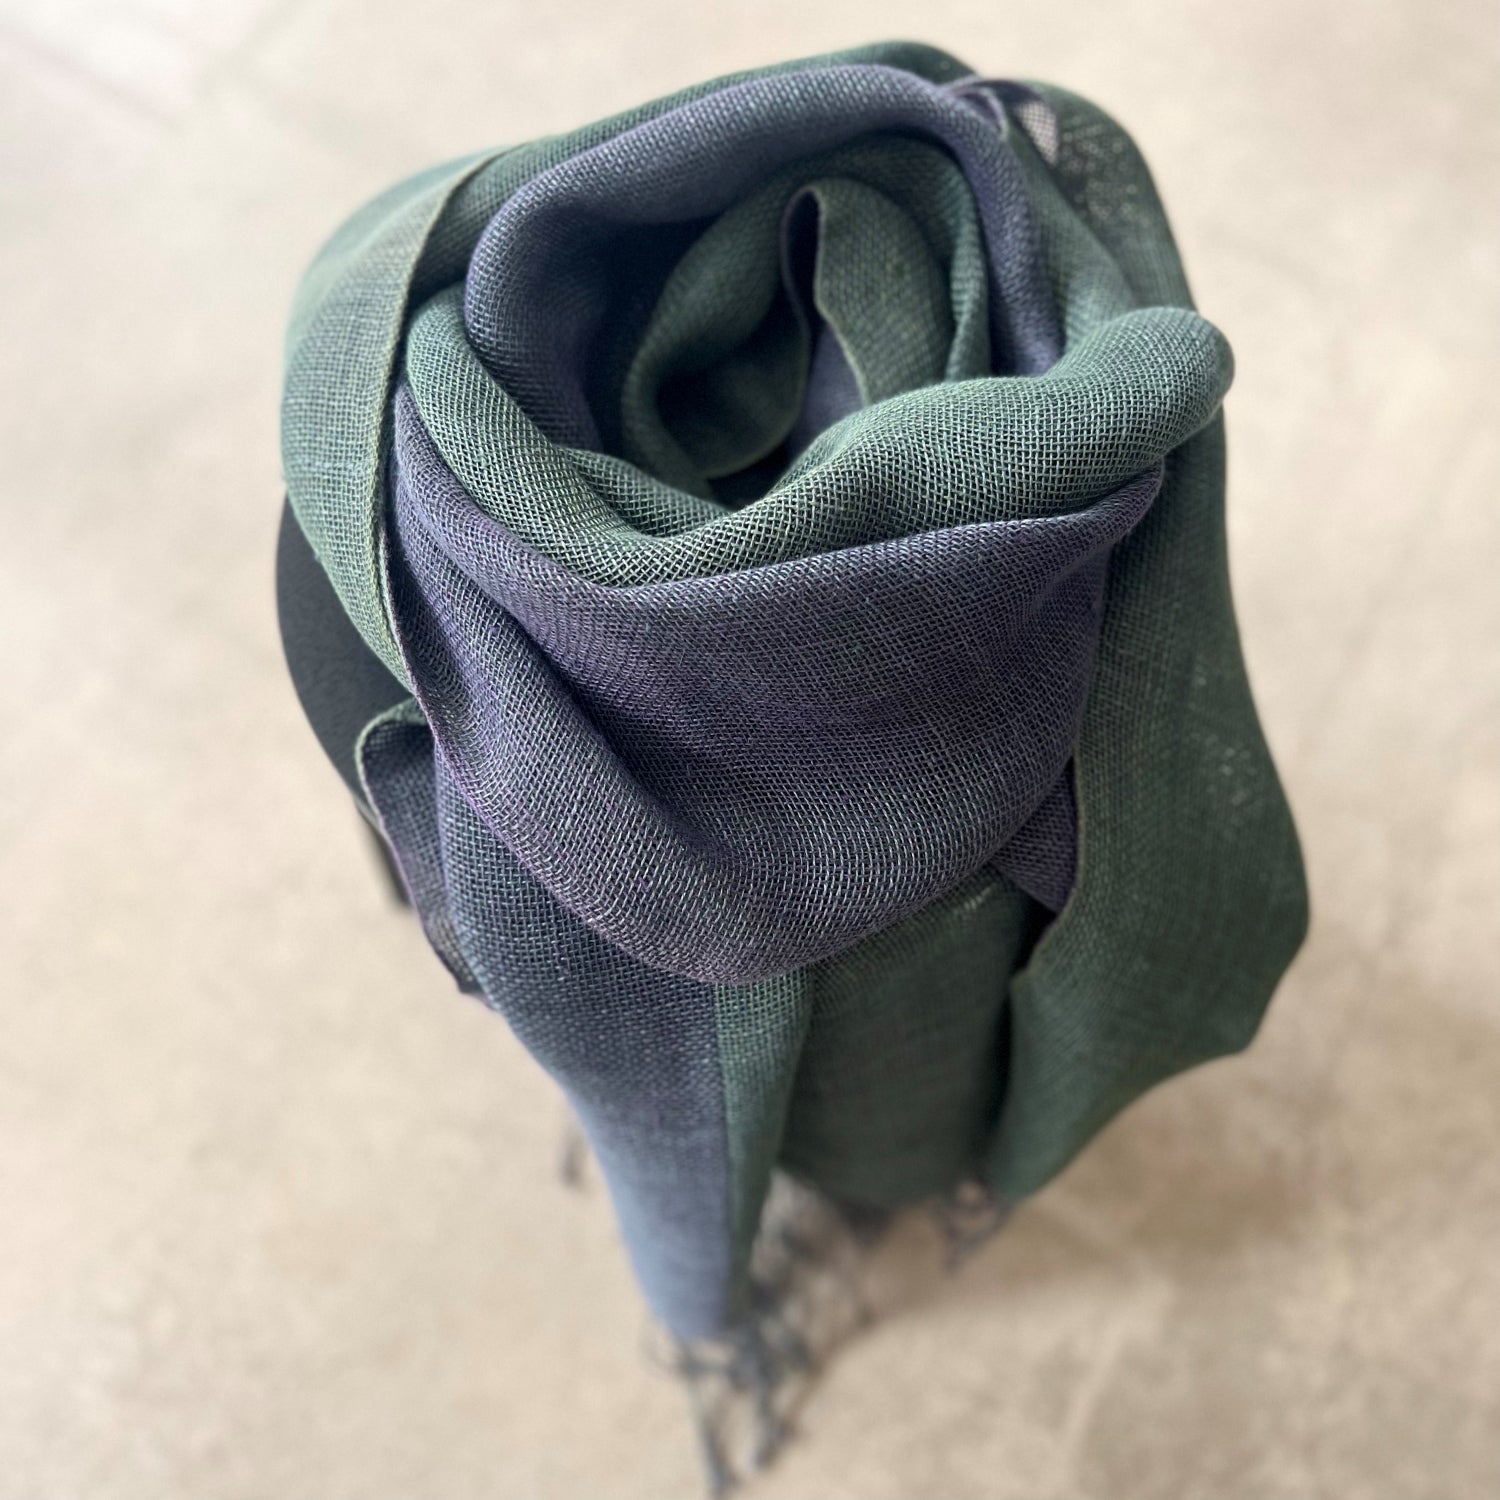 Handwoven Linen double layer scarf in emerald green and aubergine color 70x220 cm